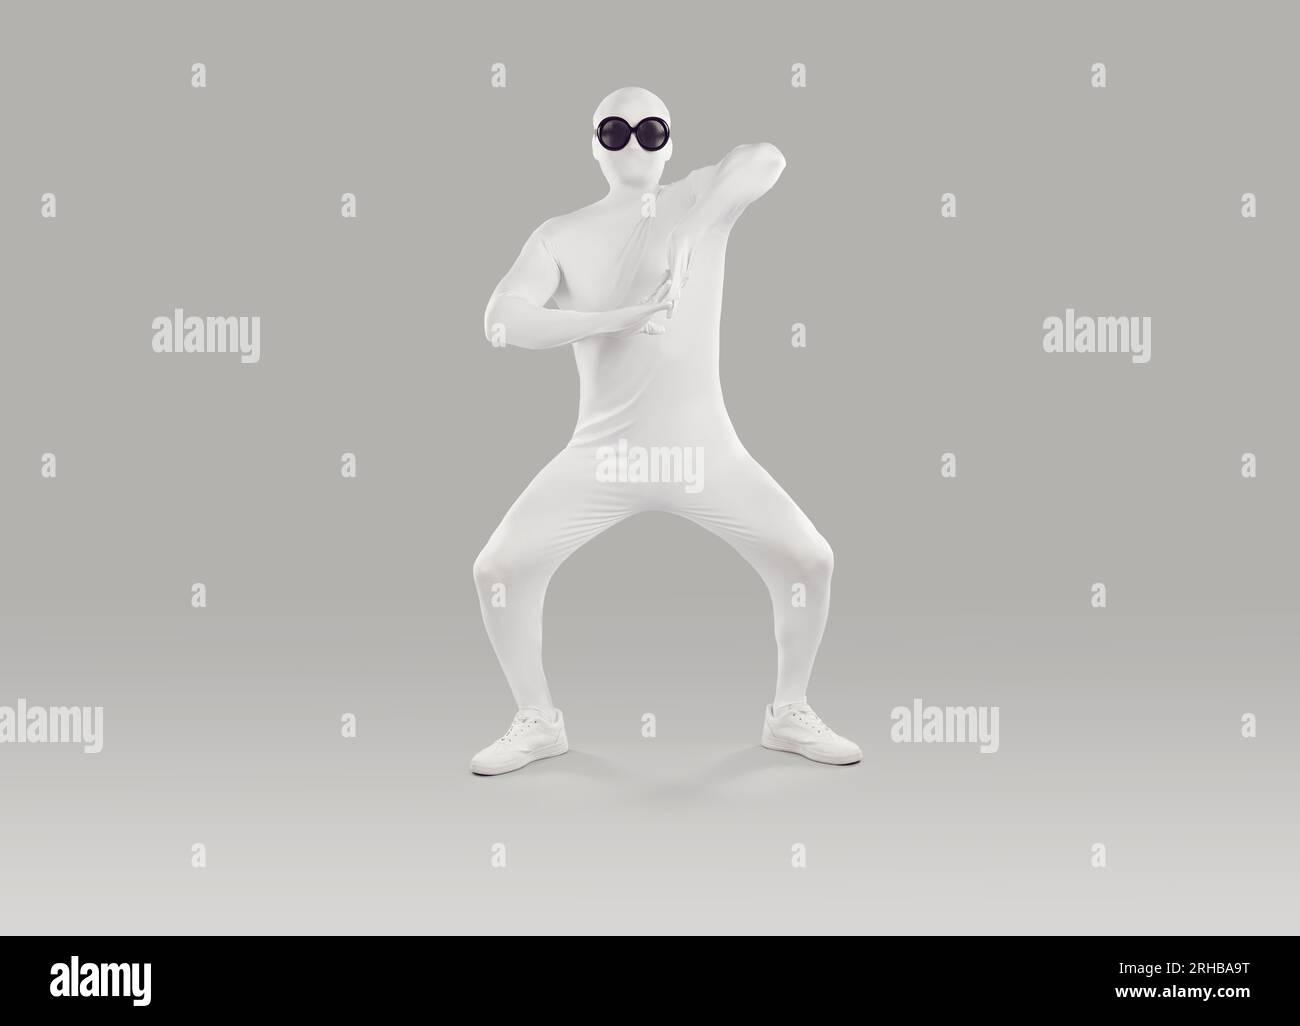 Funny man wearing white spandex bodysuit and glasses dancing on gray studio background Stock Photo